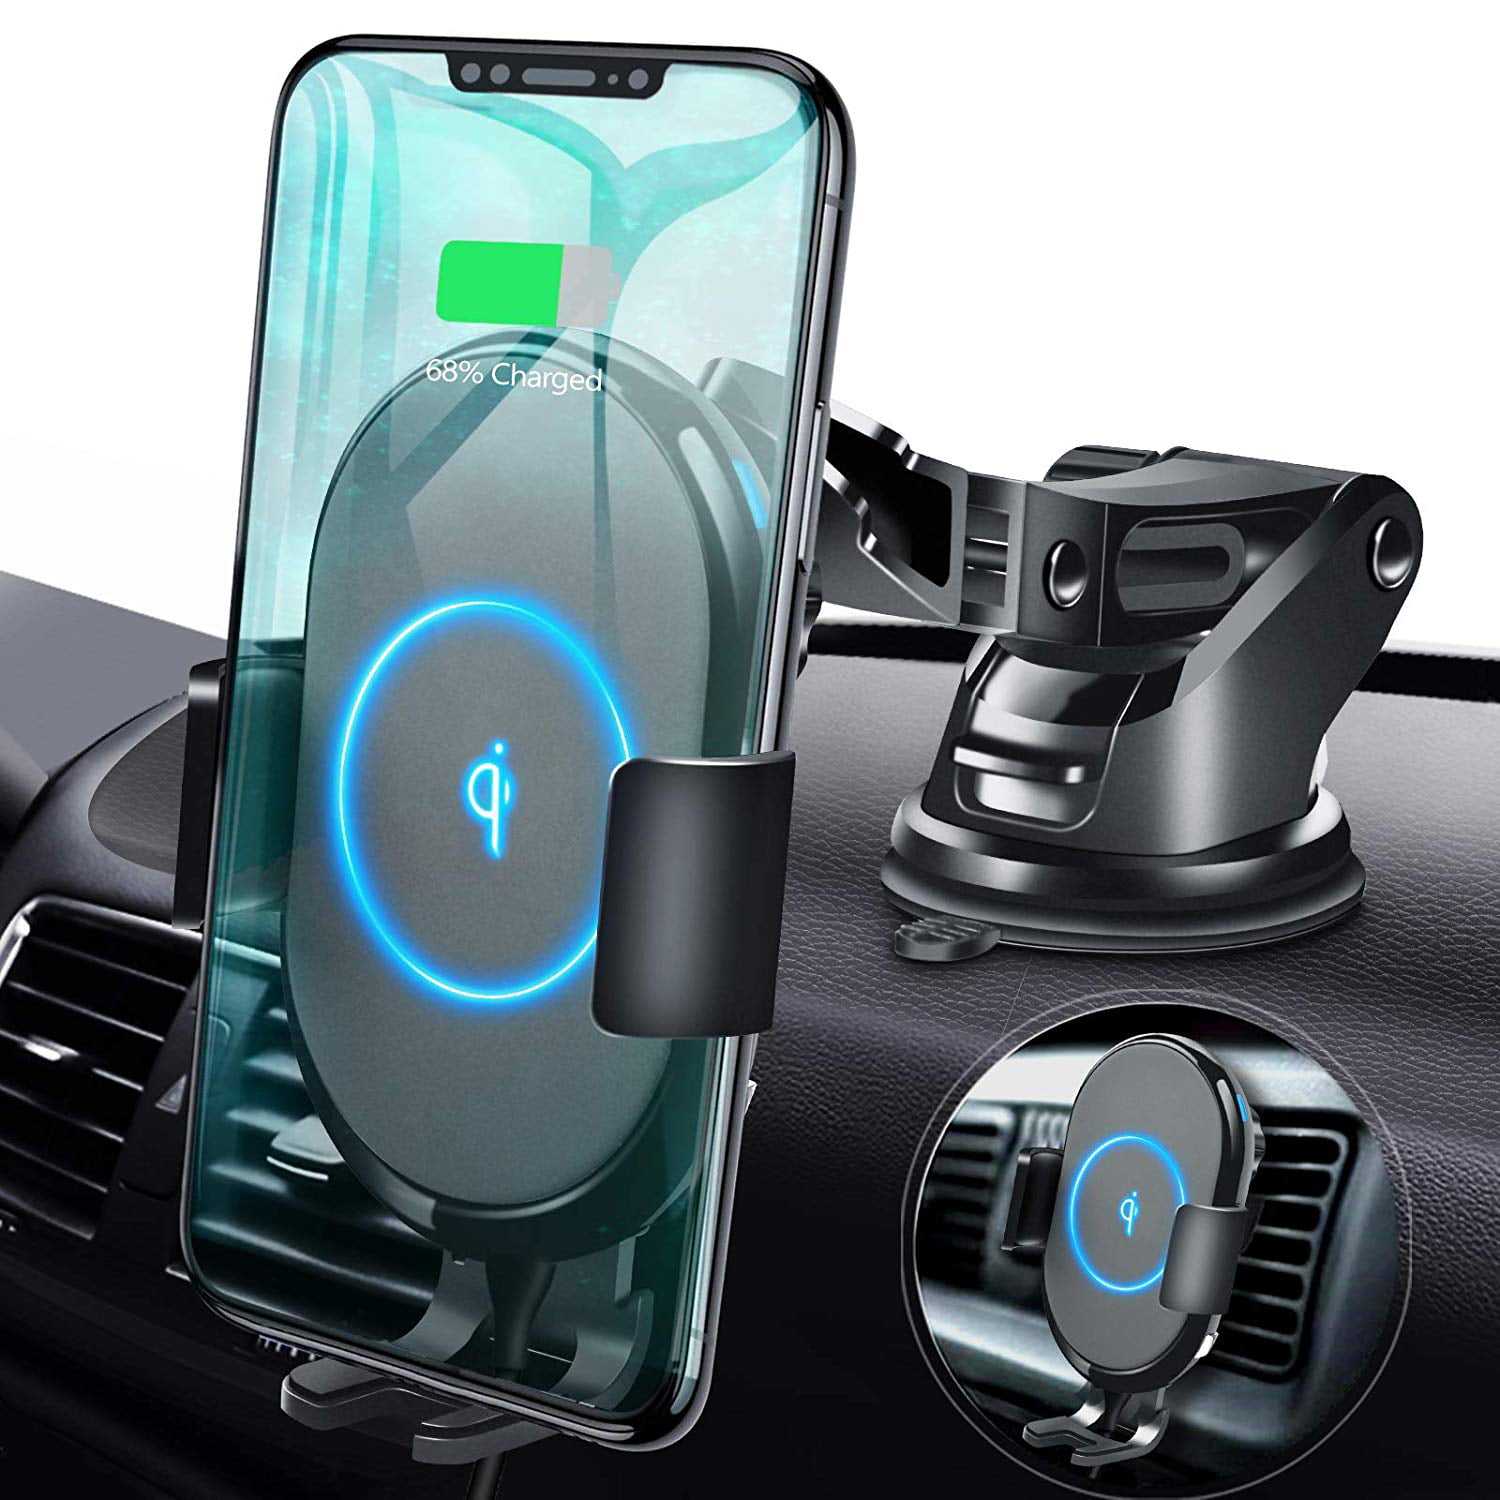 Qi Wireless Car Charger 10W Fast Charging Phone Holder Auto-Clamping Car Air Vent/Windshield Phone Mount Compatible with Samsung S10/S10+/Note 9/s9/s9+/s8/s8+/Note 8,iPhone 8/8+/X/XS/XR 